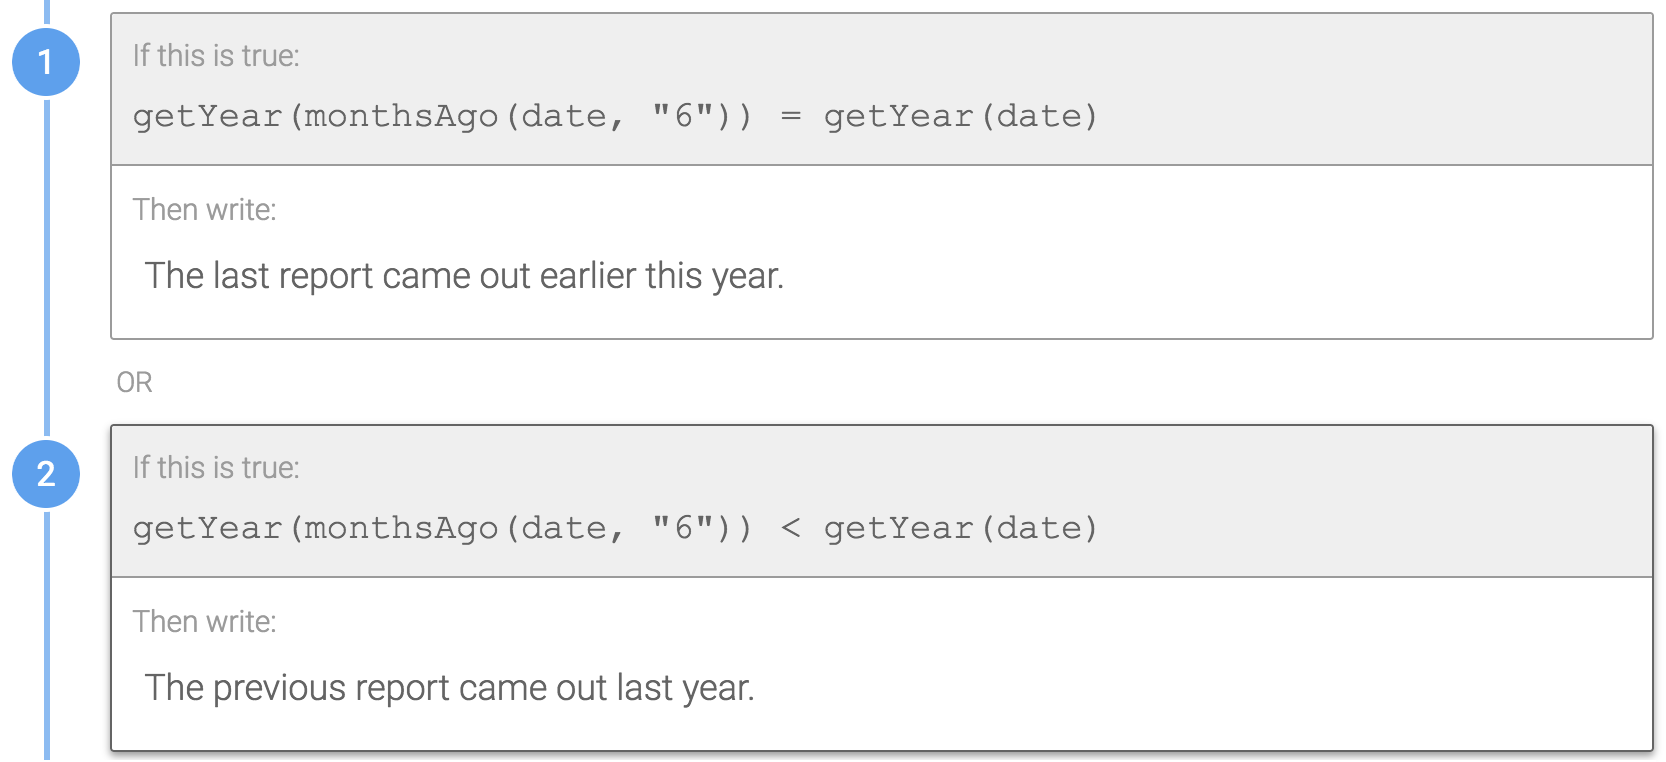 These rules are subtracting 6 months from the date, then getting the year for that new date. You can then customize the sentence to say the last report came out last year or this year.